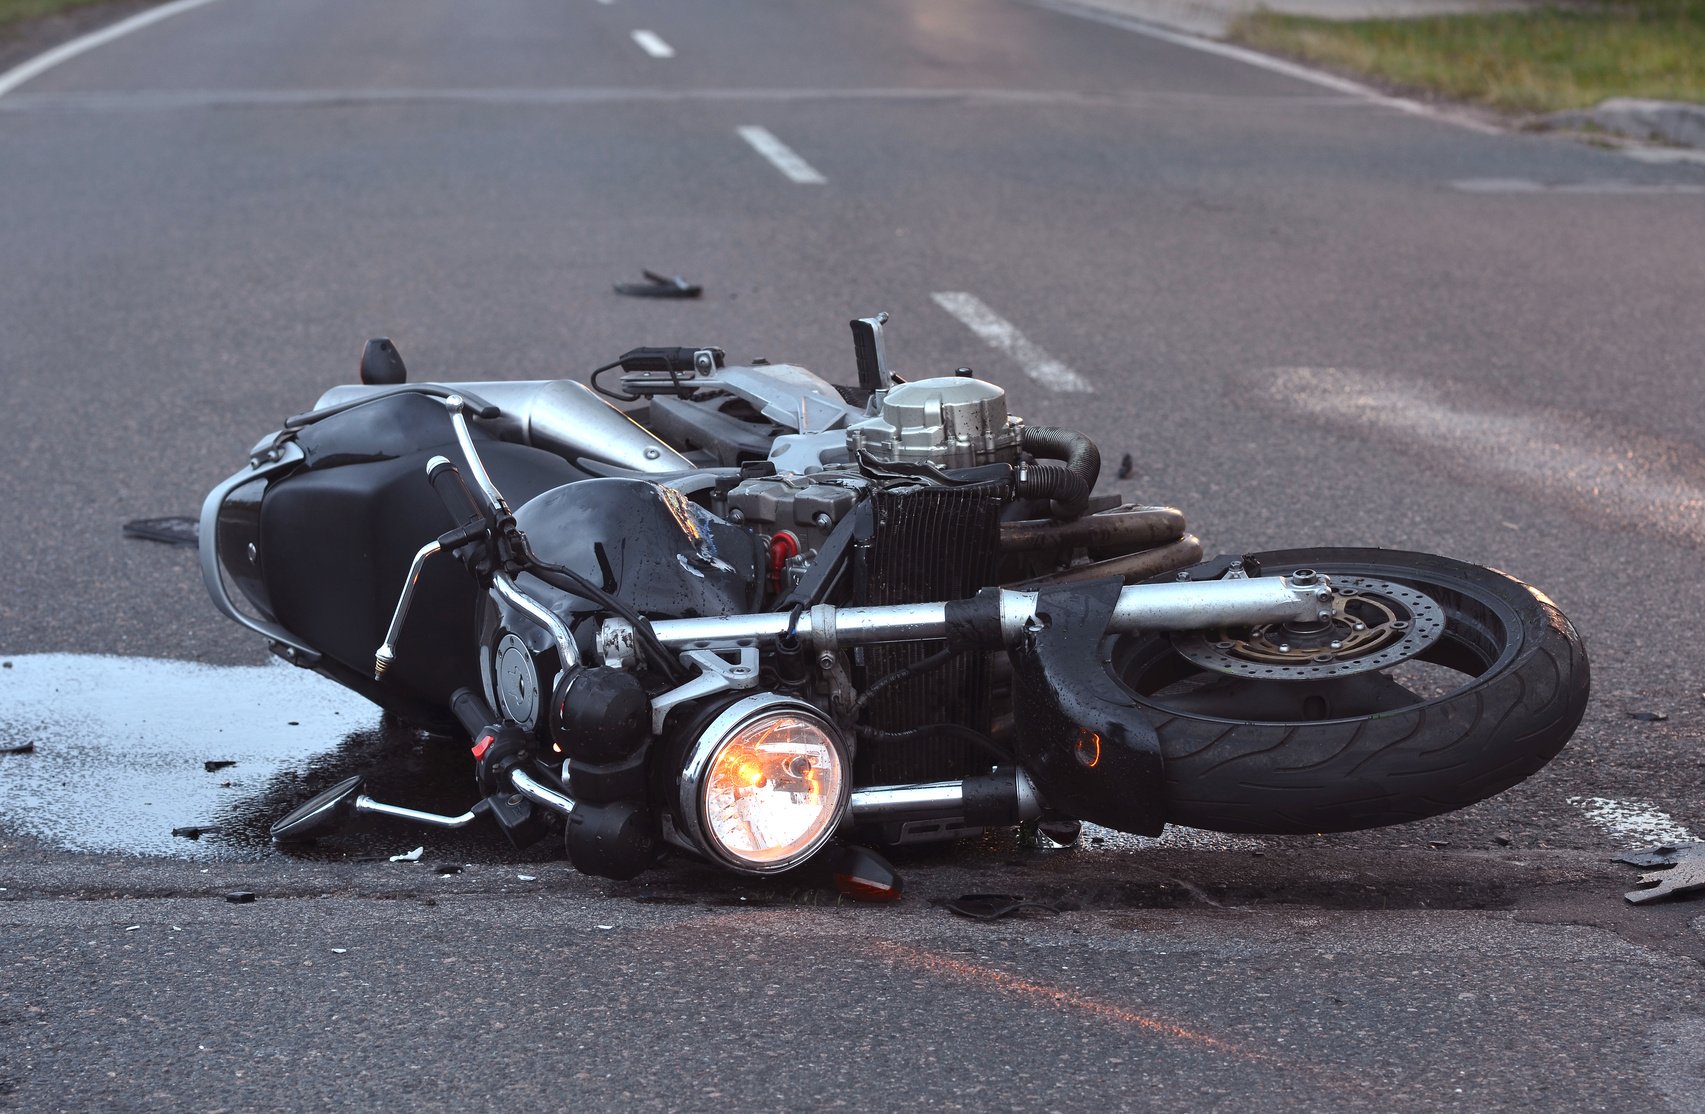 Surprising Facts About Florida Motorcycle Accidents